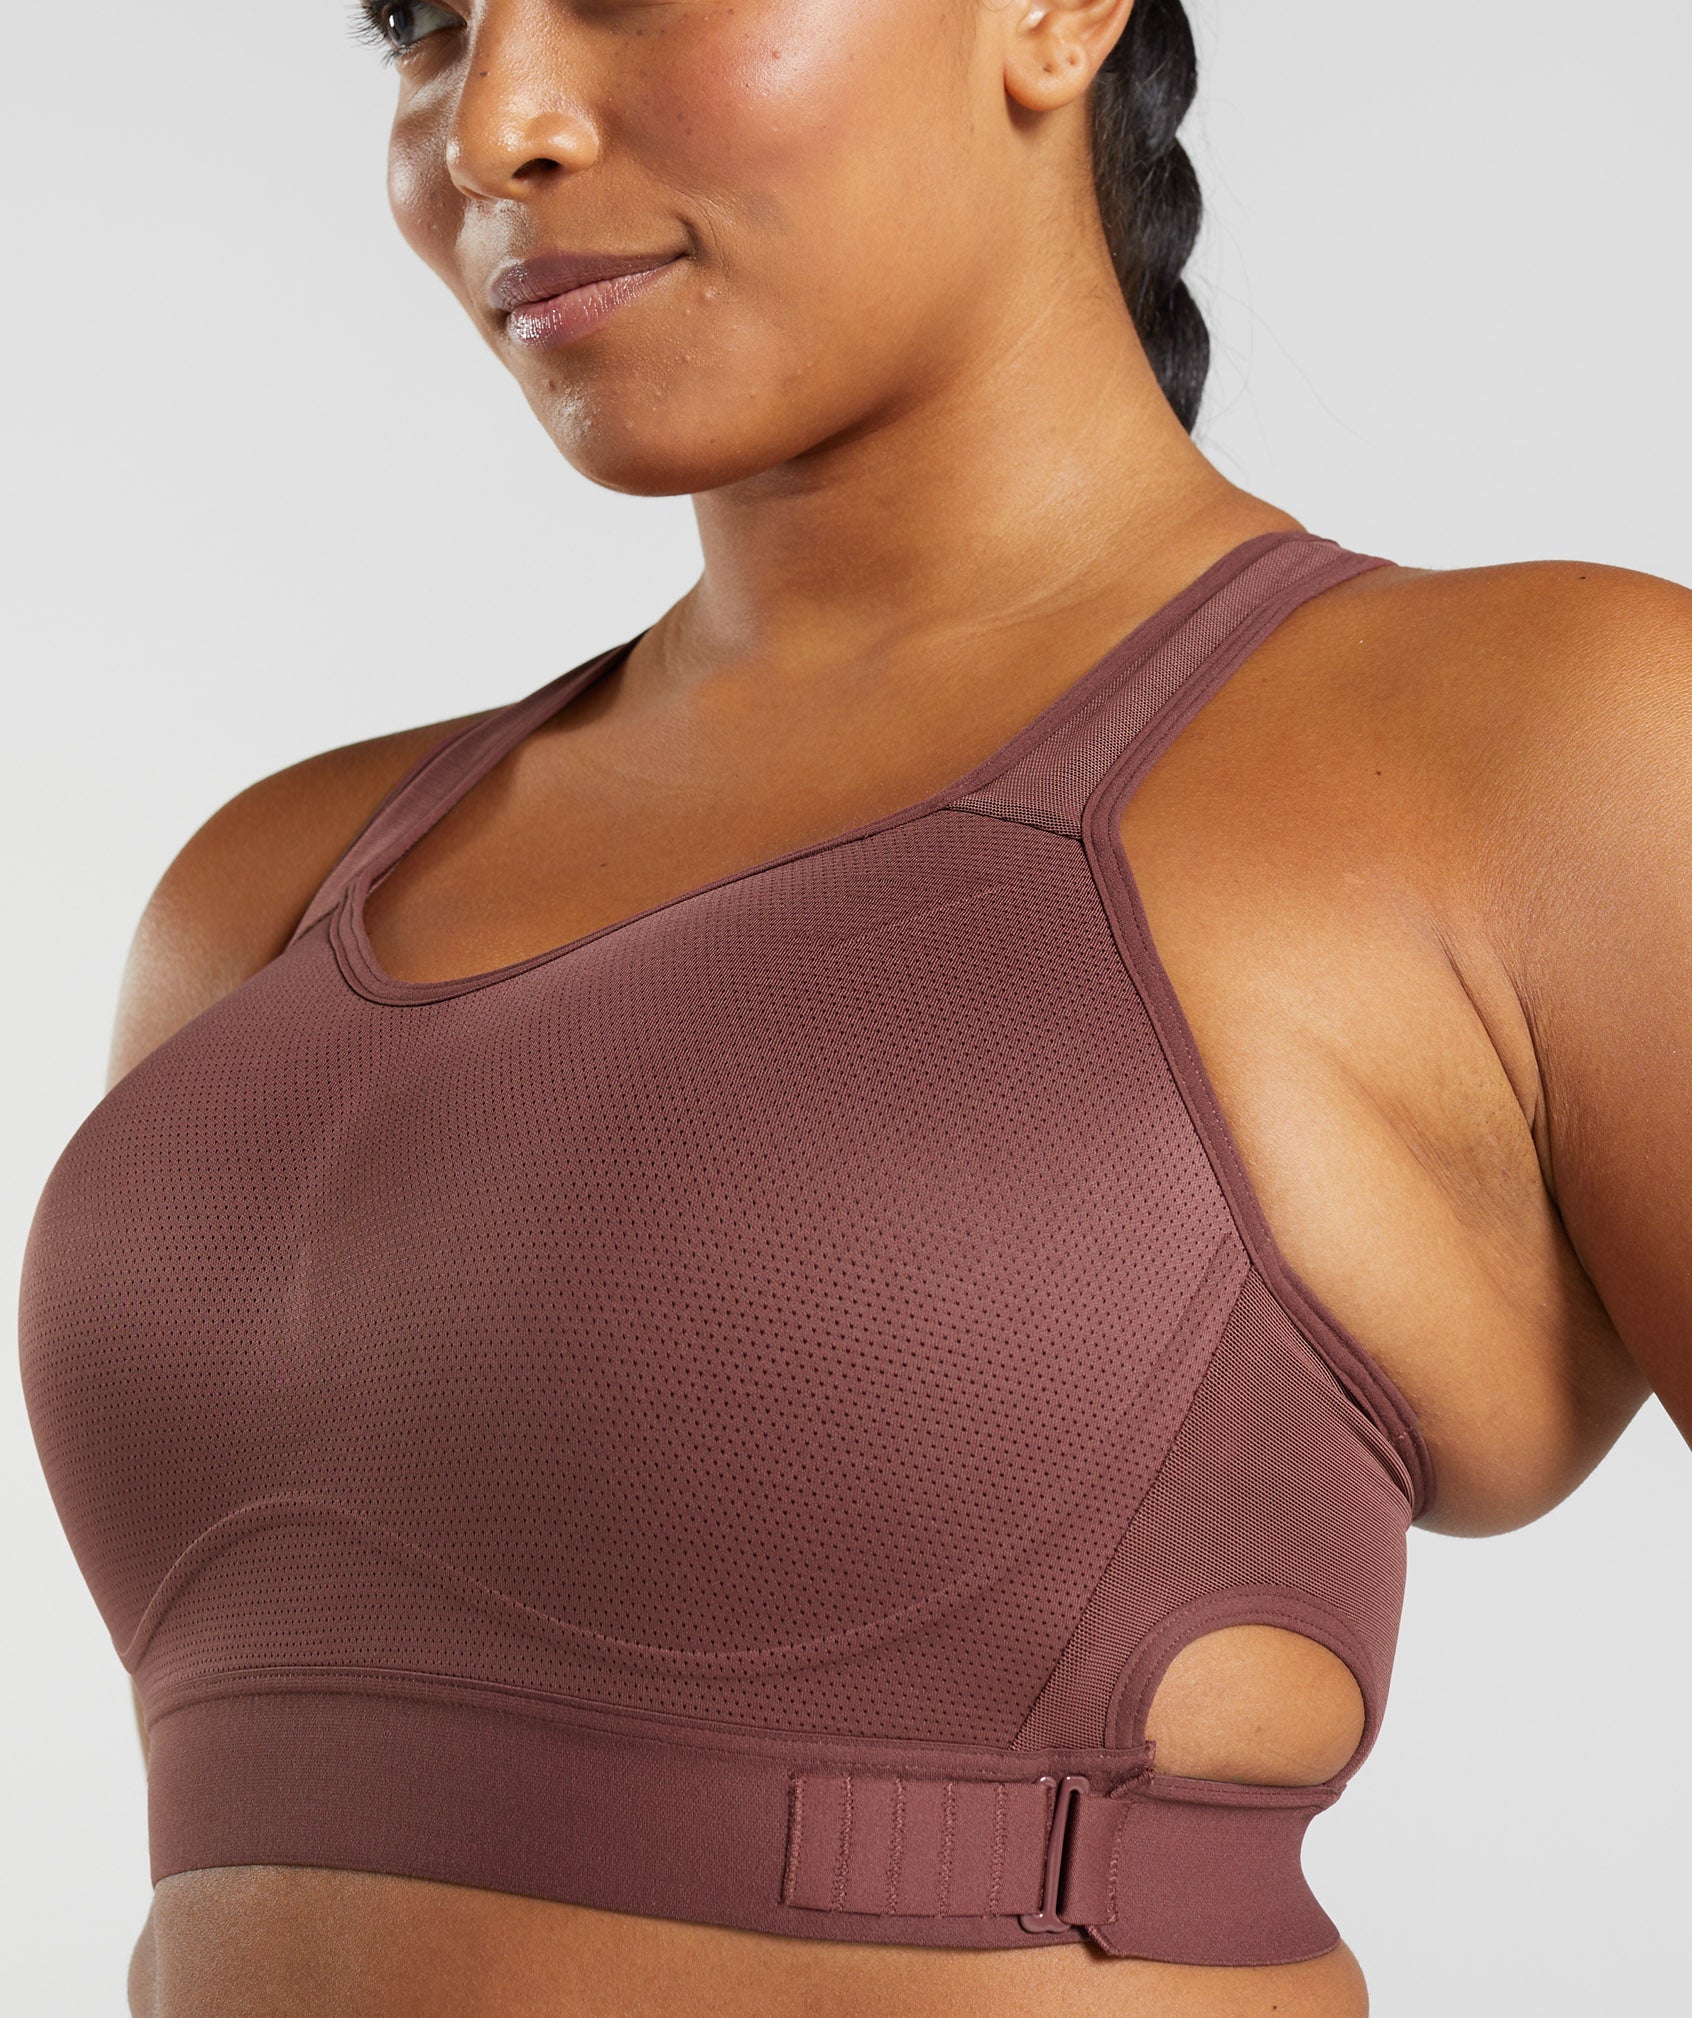 Racerback High Support Sports Bra in Cherry Brown - view 3